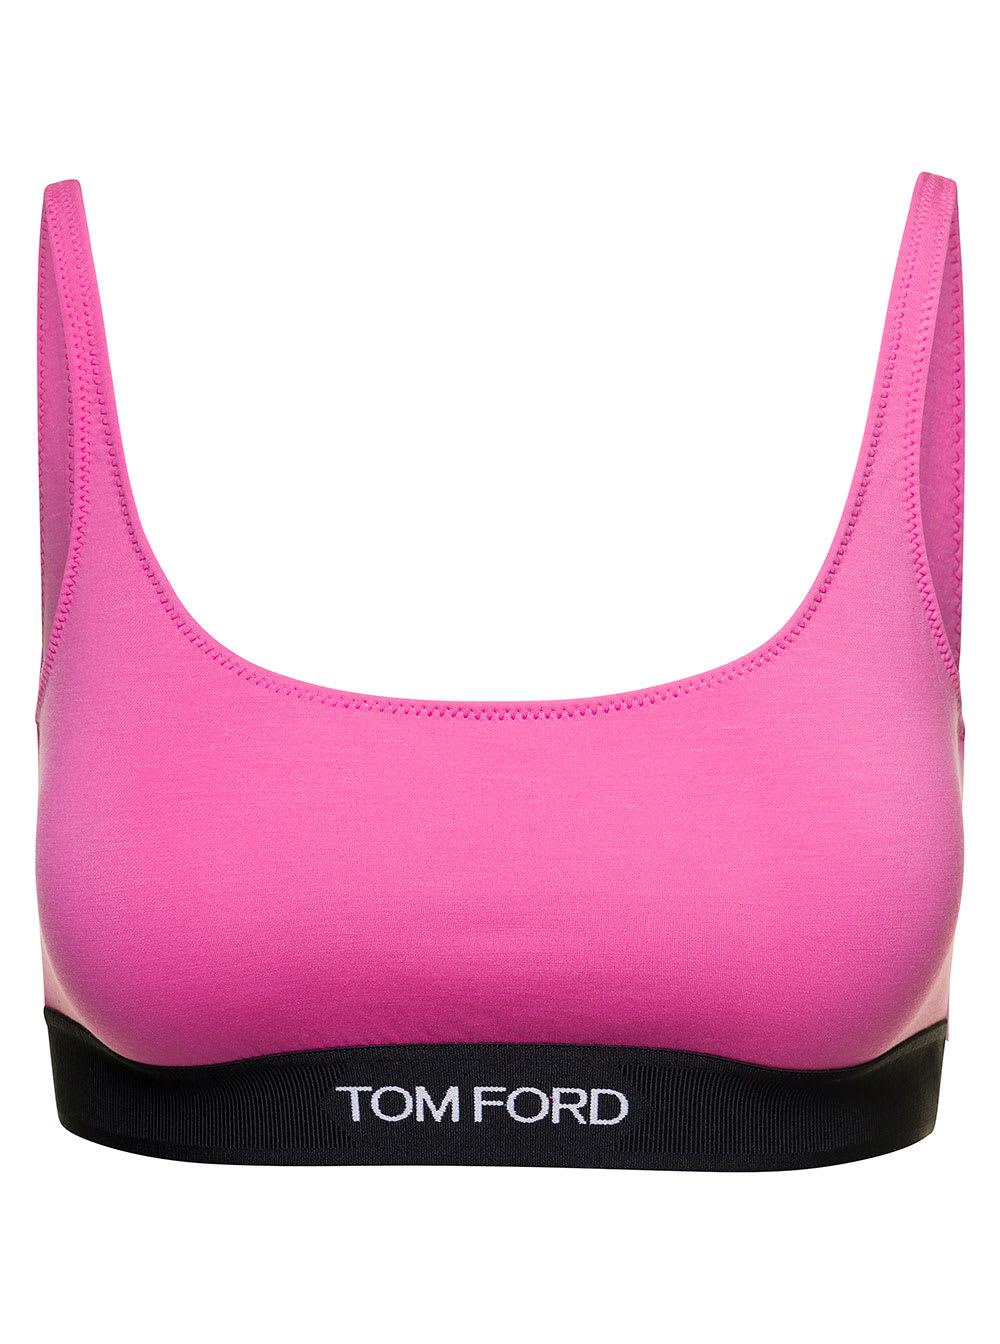 TOM FORD PINK AND BLACK BRALETTE WITH CONTRASTING LOGO PRINT IN STRETCH MODAL WOMAN